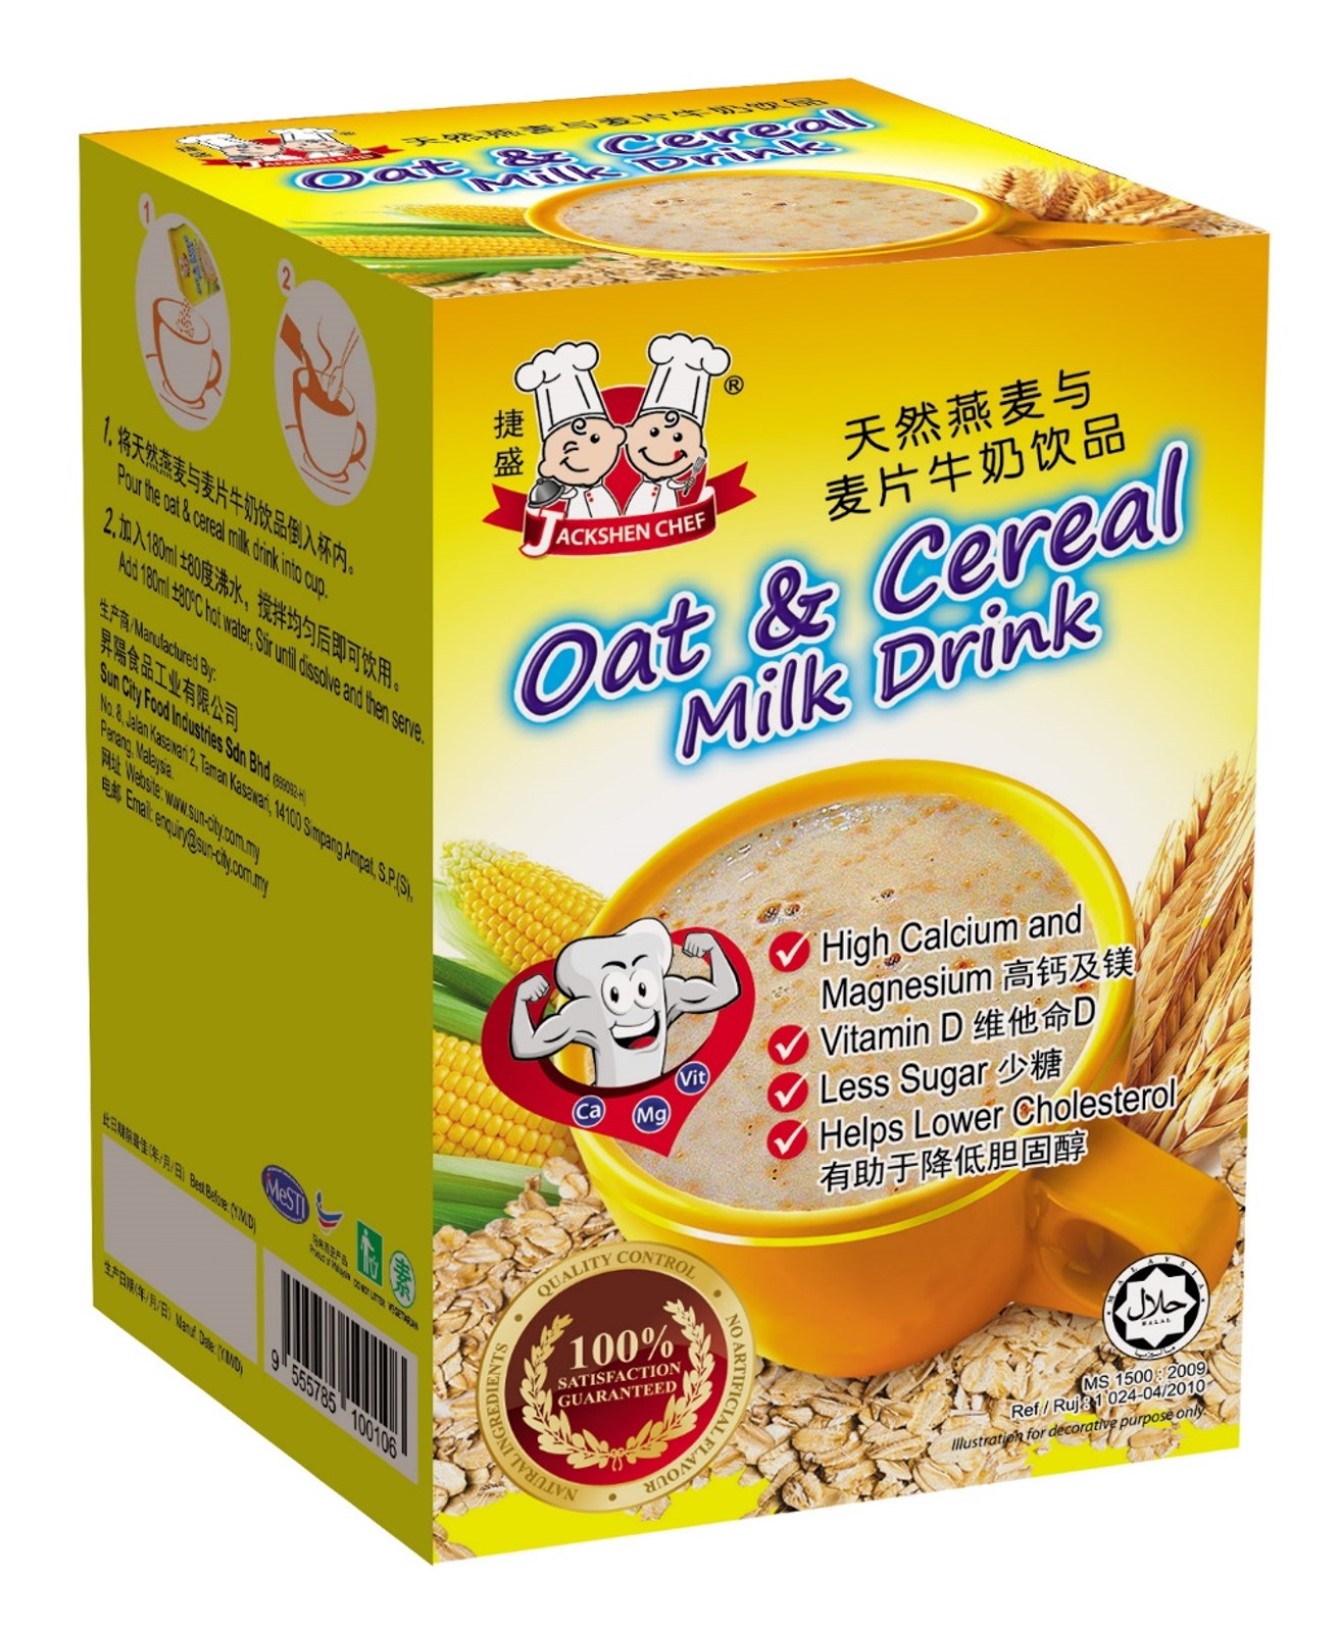 REPLACEMENT MEAL OATS & CEREALS MILK ENRICHED WITH SEAWEED CALCIUM